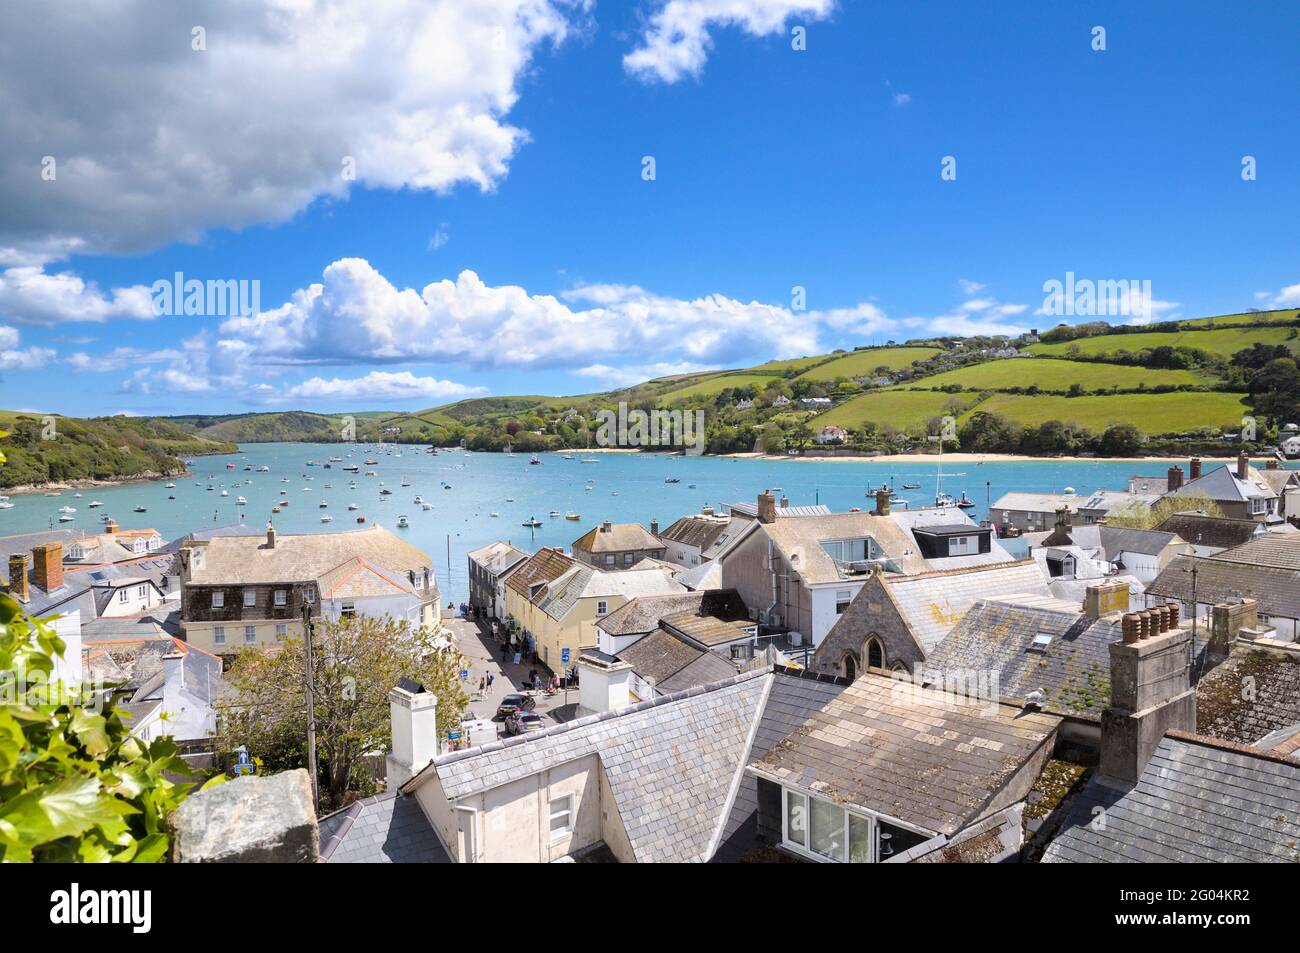 View over the town and rooftops of Salcombe looking across the Kingsbridge Estuary on a bright, clear sunny day. South Hams, South Devon, England, UK Stock Photo